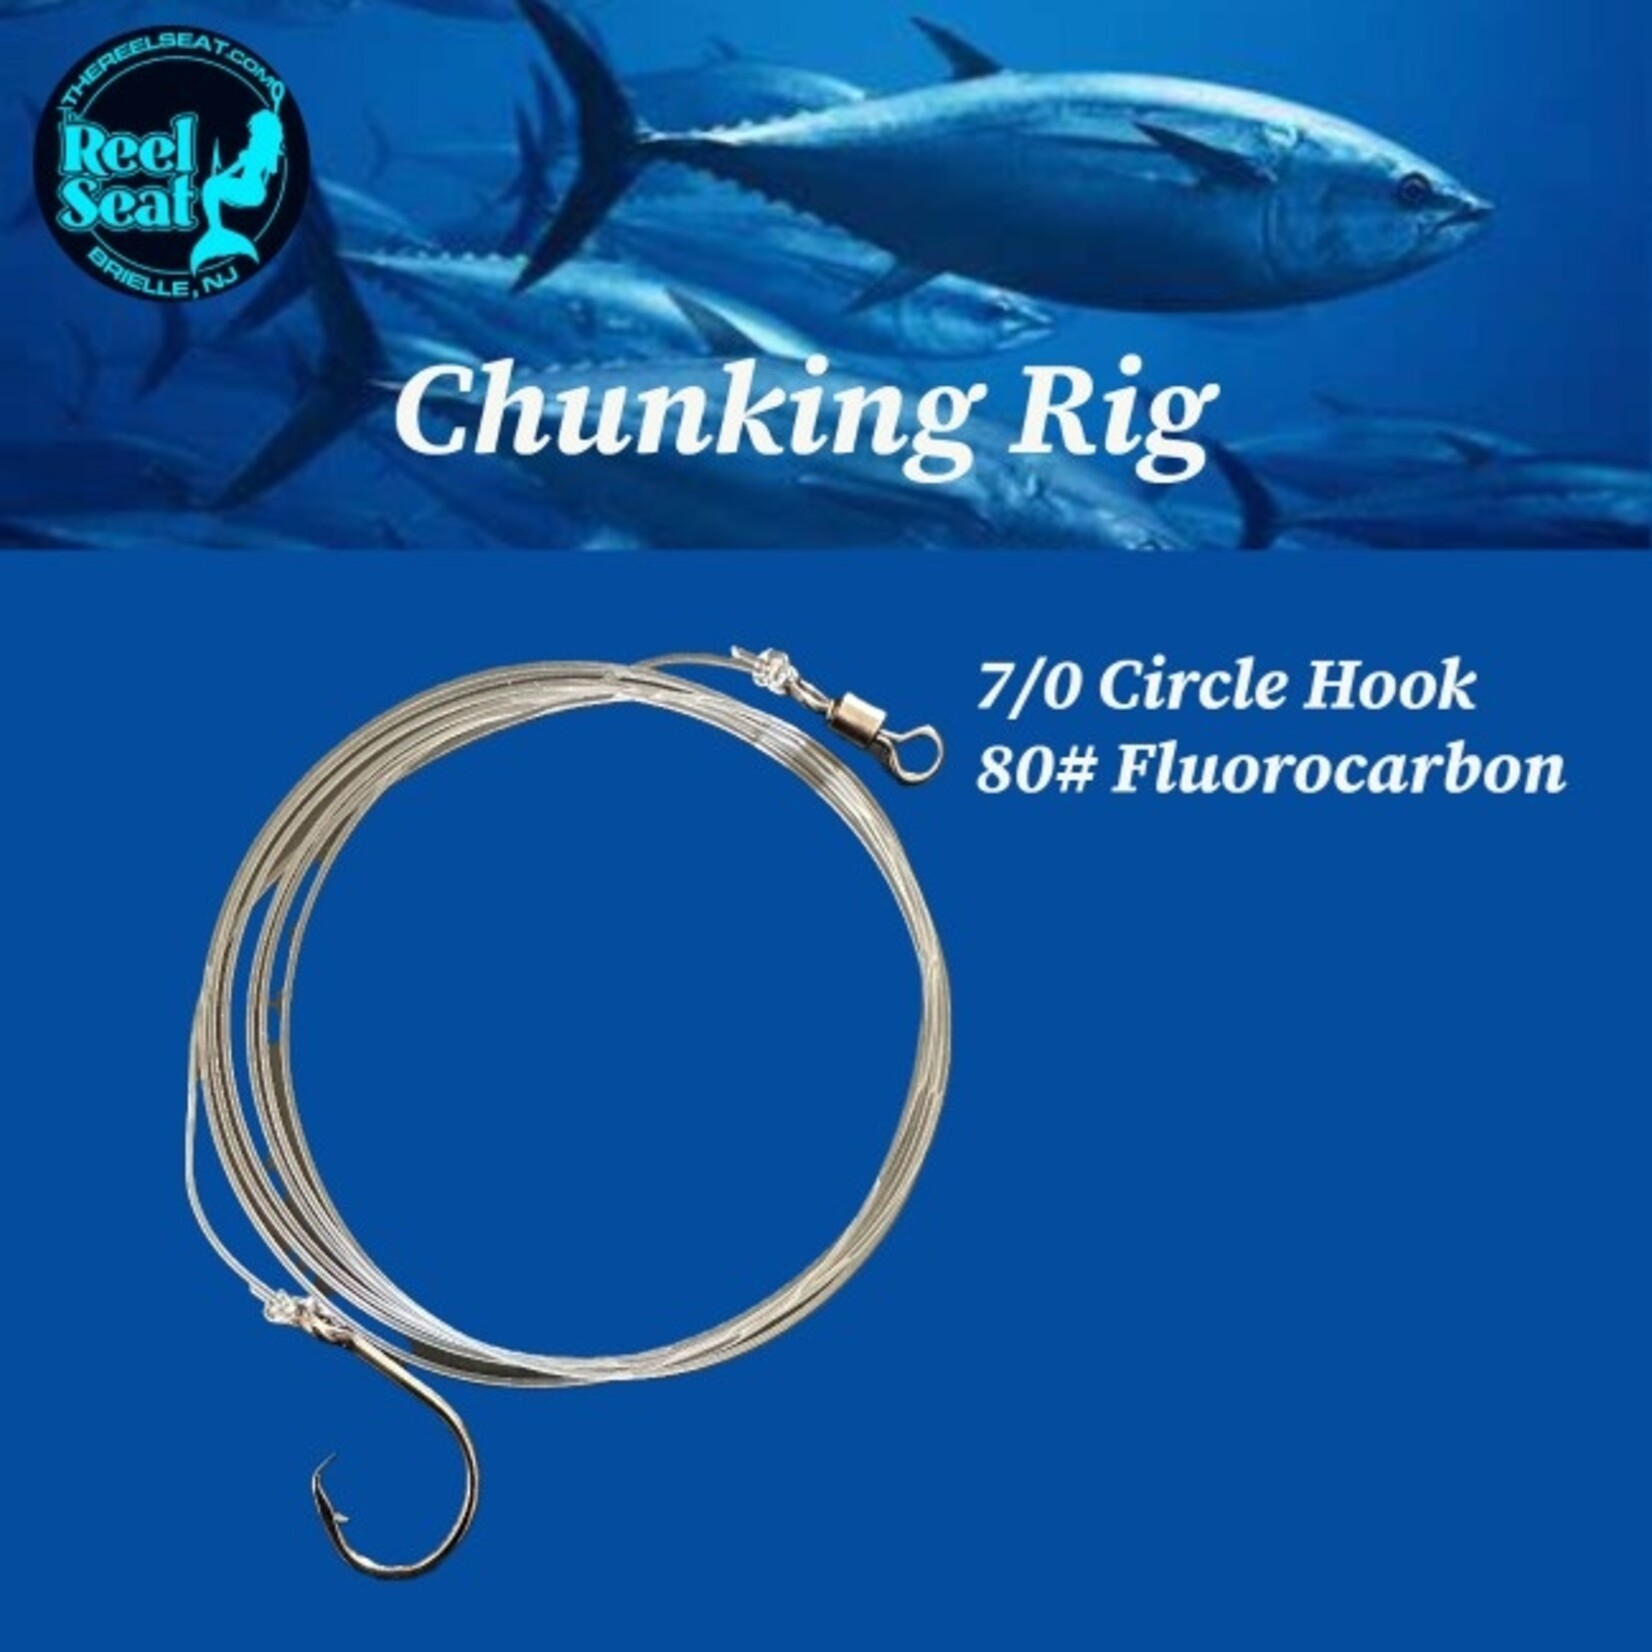 The Reel Seat RS Chunking Rig 7/0 circle hook on 80 lbs. fluorocarbon